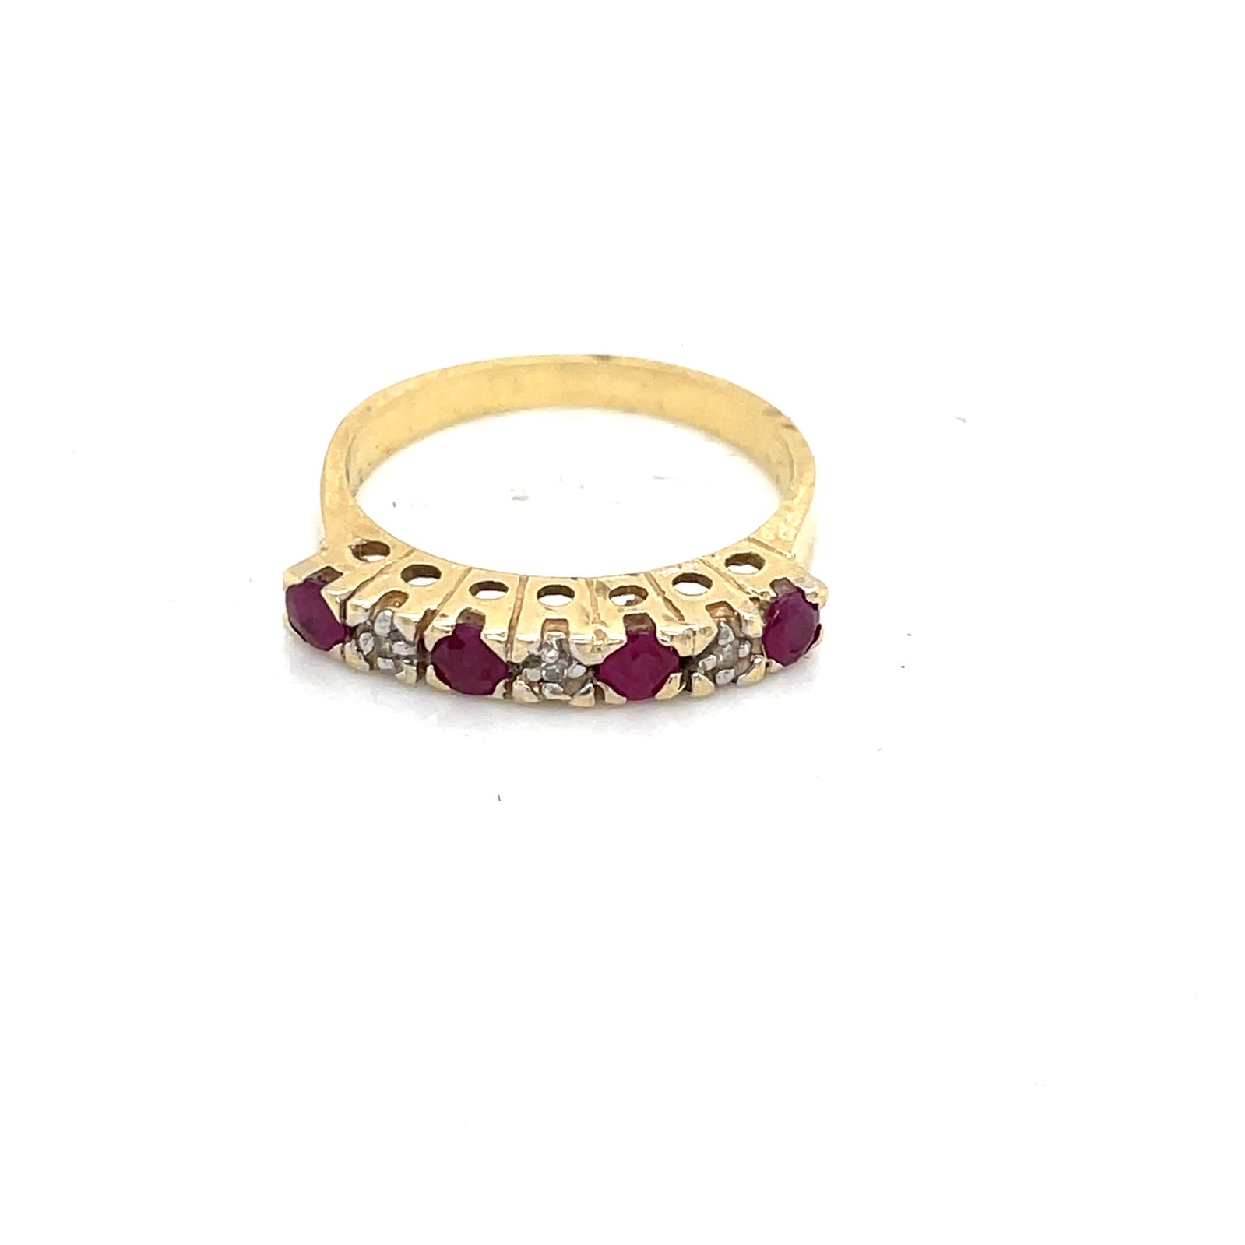 14k Yellow Gold Ruby and Diamond Ring

Size 6.75